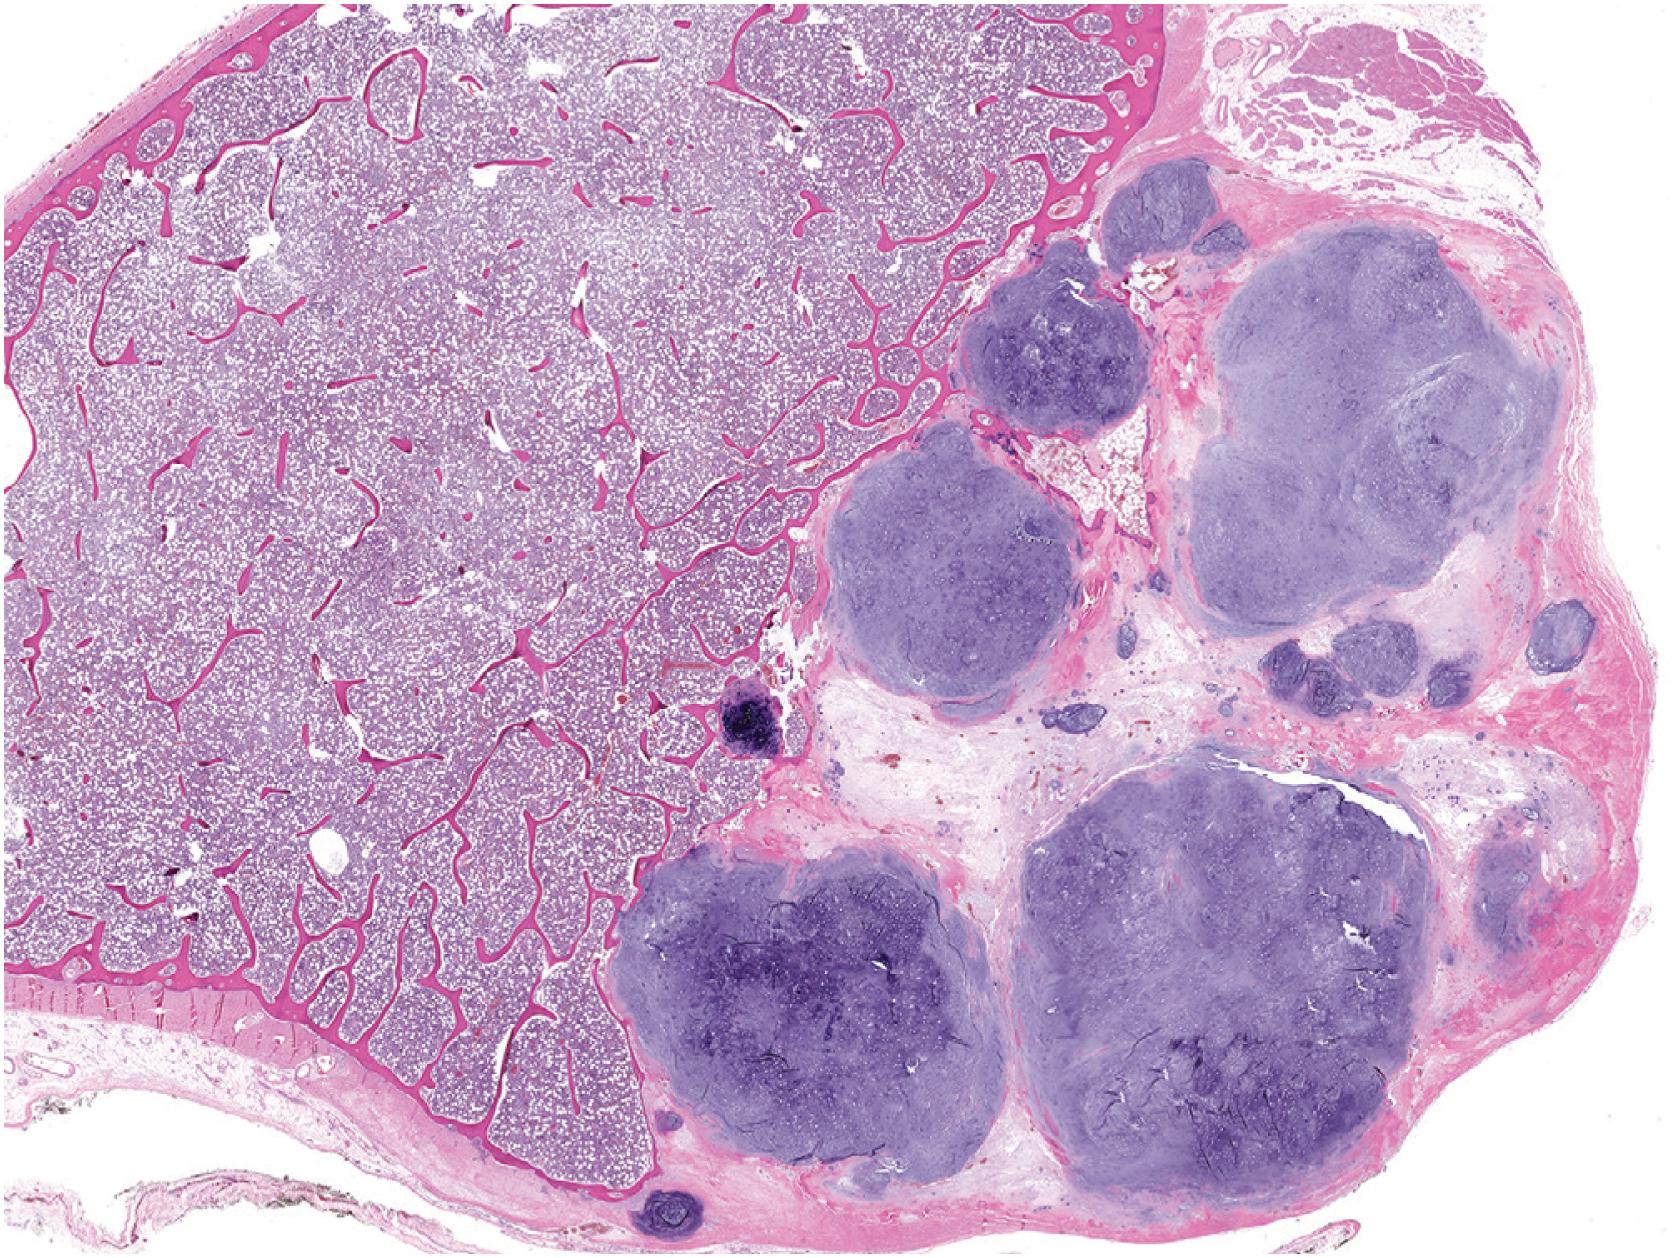 Fig. 17.28, A low-power histologic image of periosteal chondroma shows a subperiosteal surface cartilaginous tumor. The tumor is multinodular and demonstrates a well-demarcated border between the lesion and the underlying cortex.